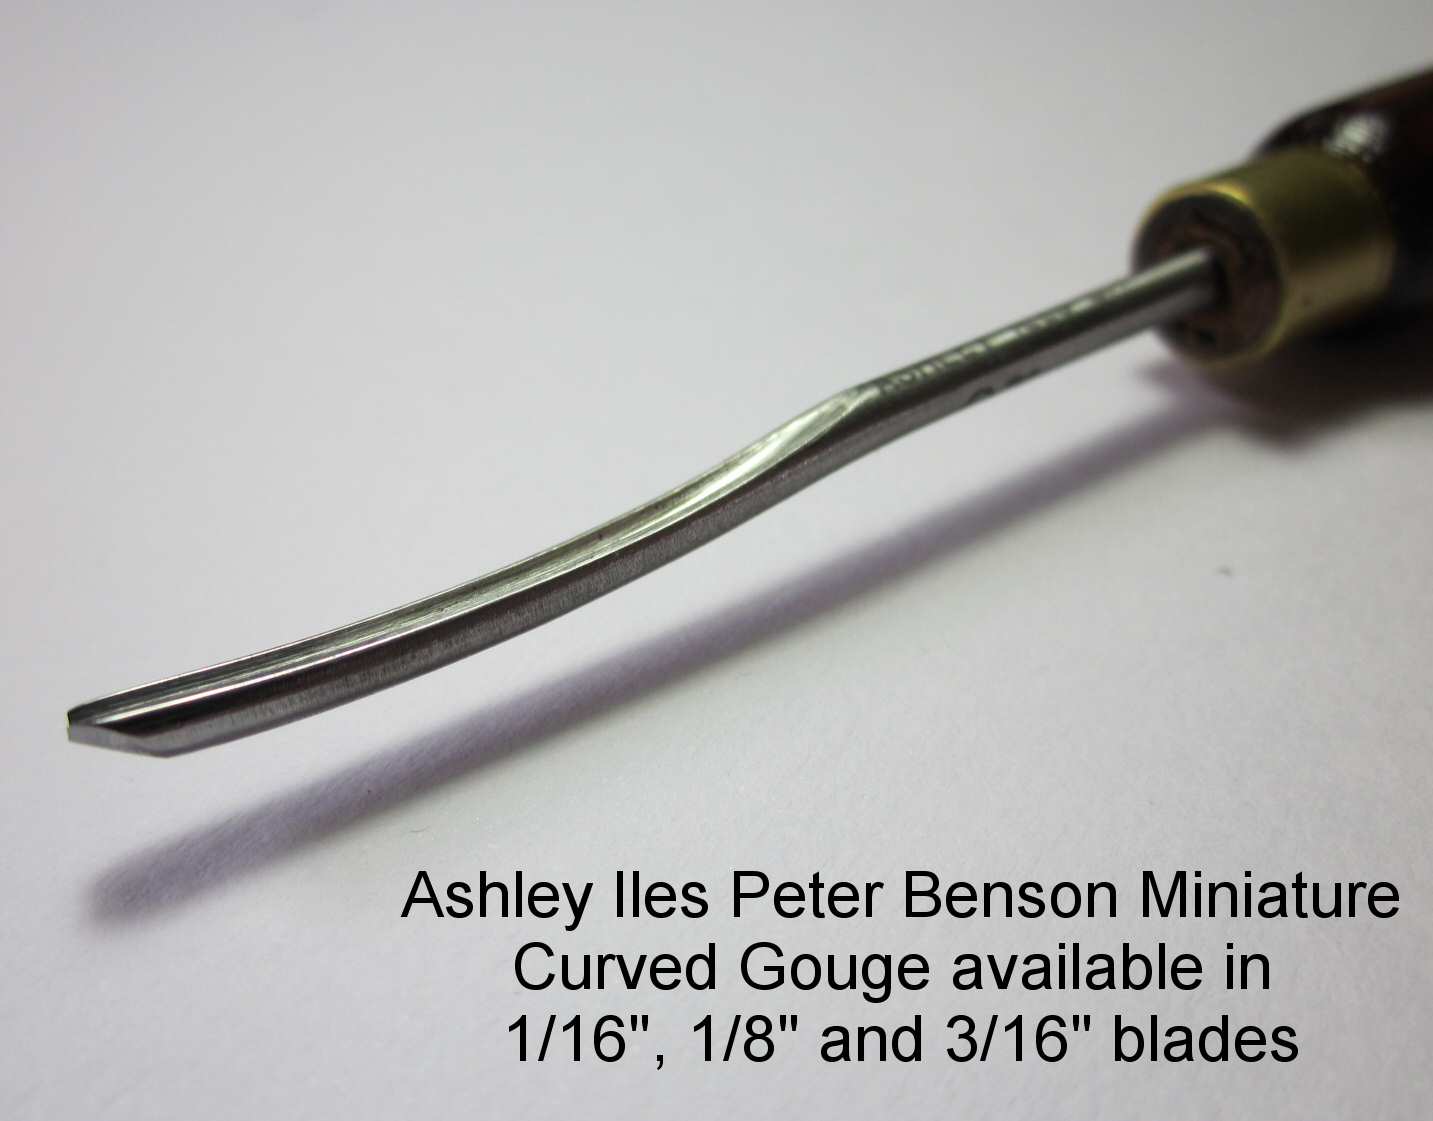 1/8" (3mm) Peter Benson Miniature Curved Gouge (Sweep 18)